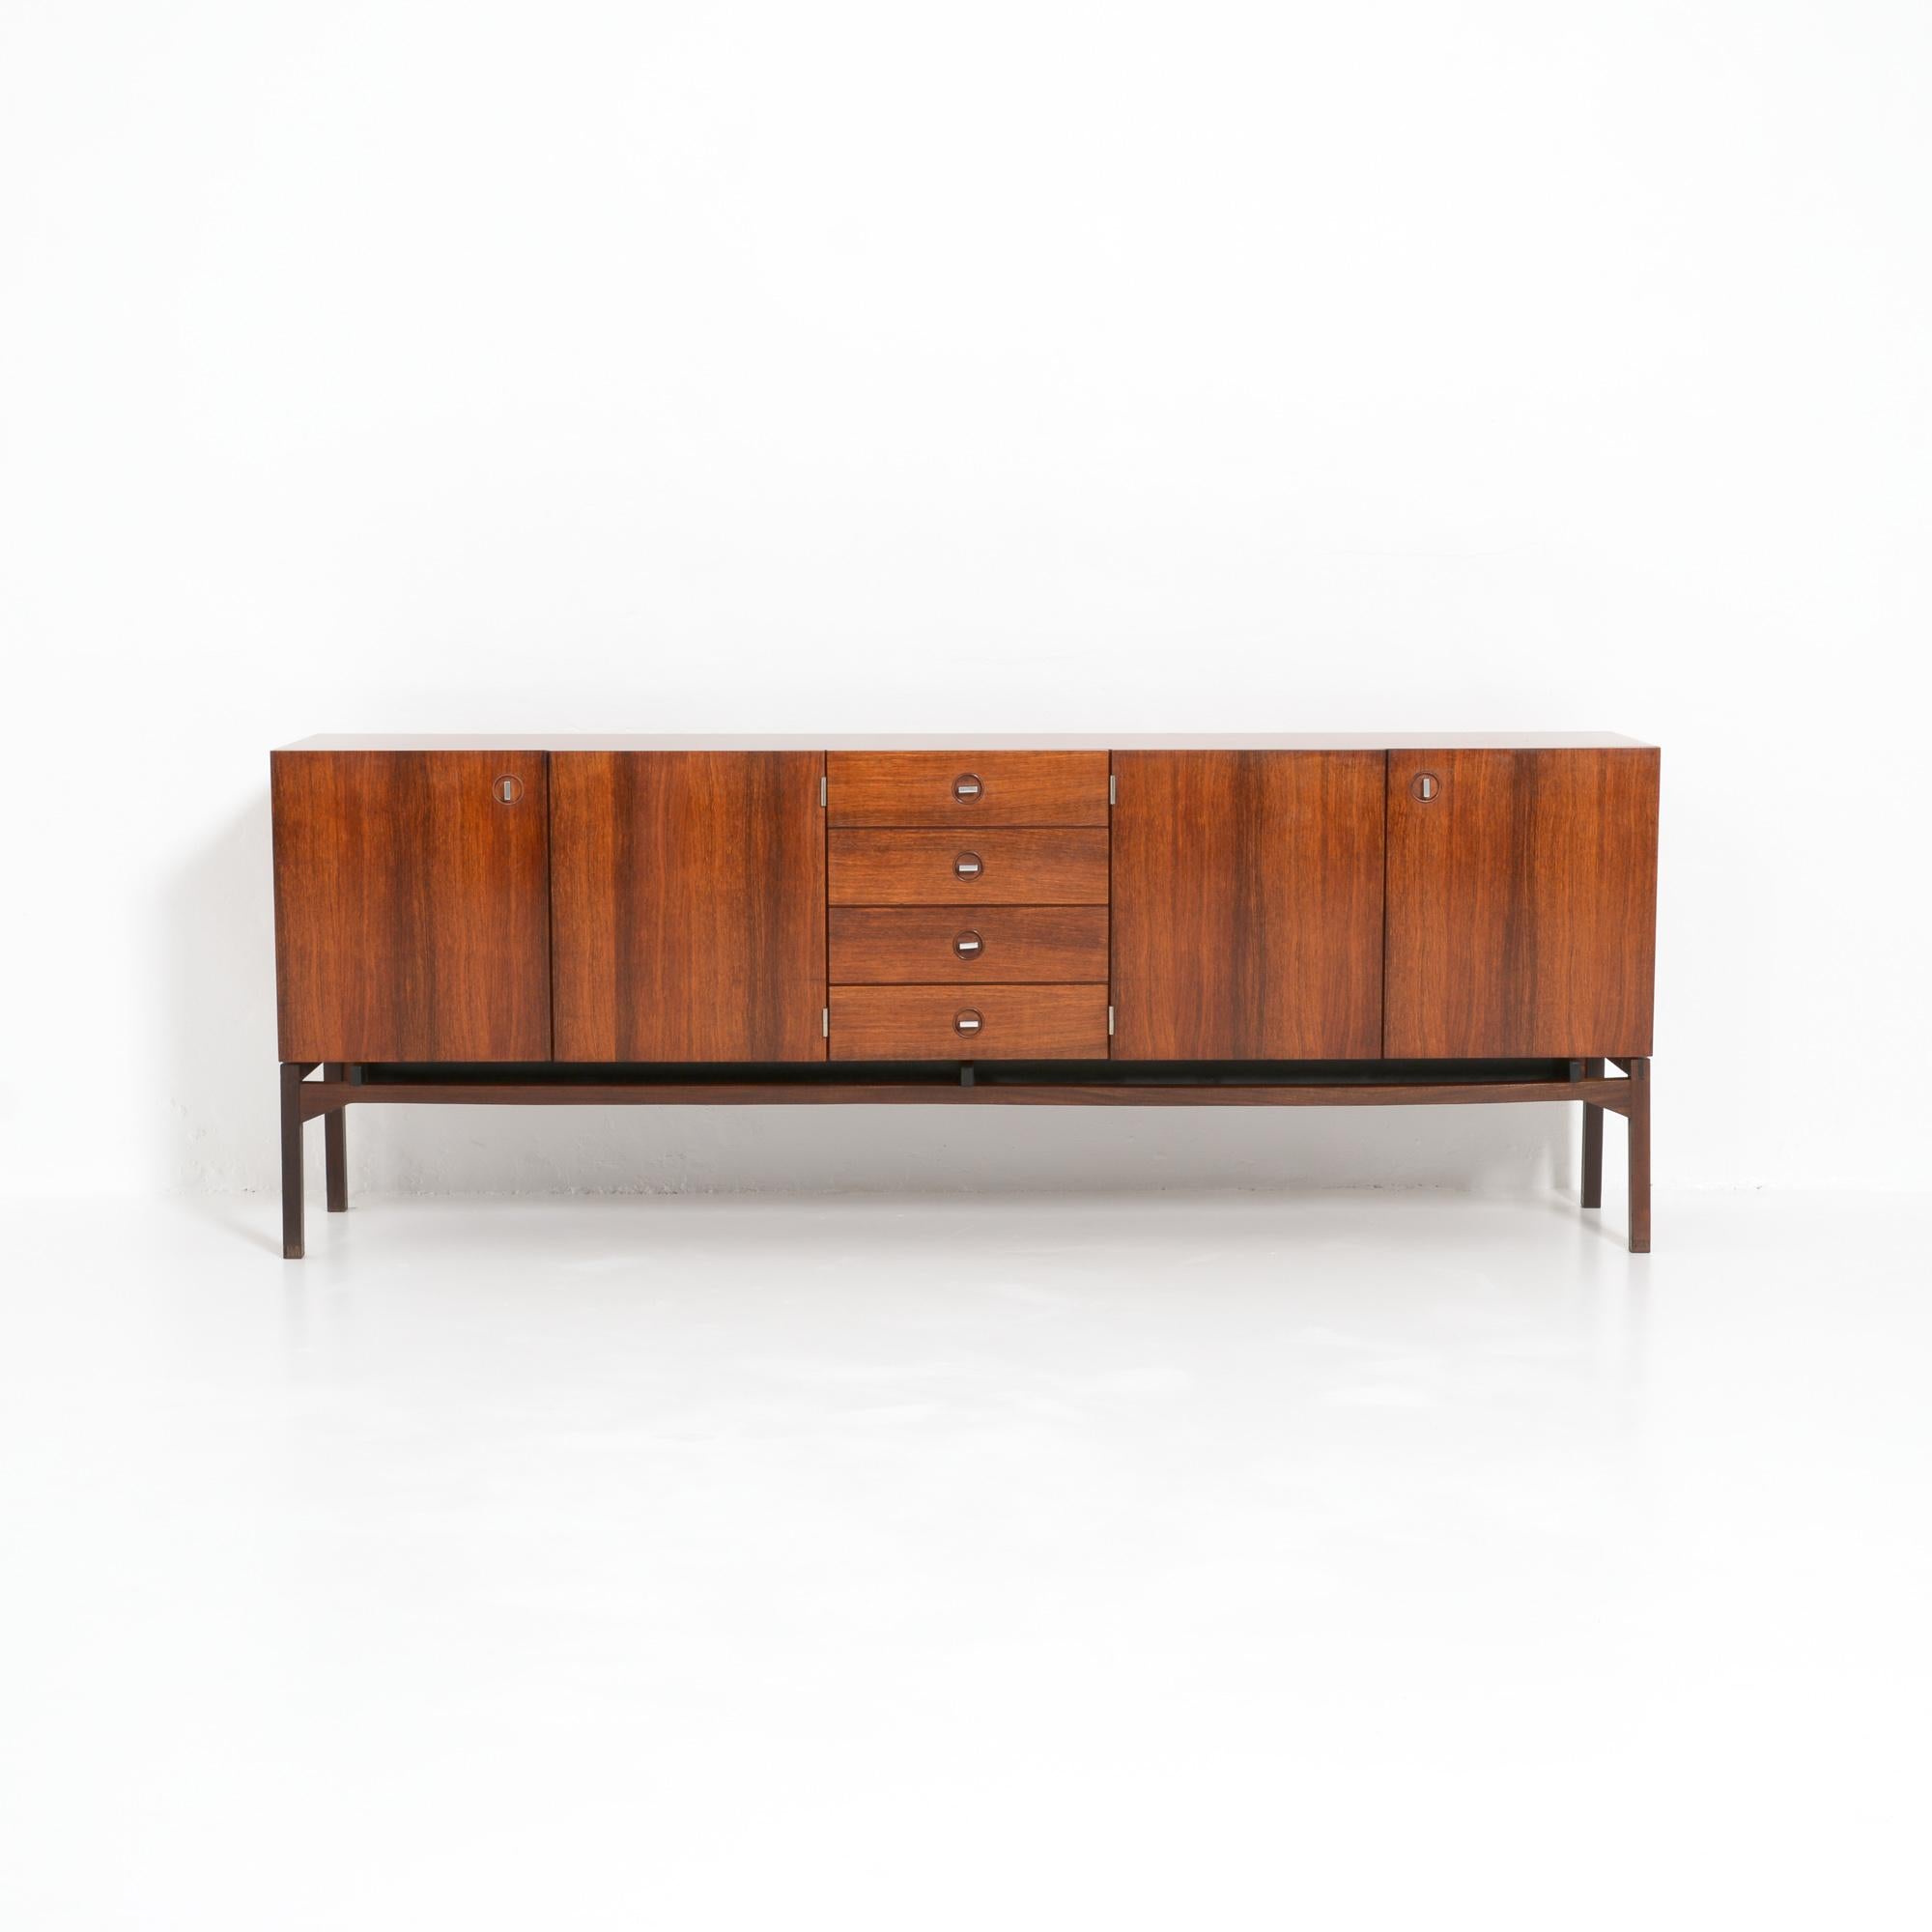 Pieter De Bruyne has designed this sideboard in the Europ series for V-form, Belgium in 1961.
De Bruyne liked especially the harmonious design and the large span.
In the beginning of the 1960s Oswald Vermaercke from V-form attracted designers as